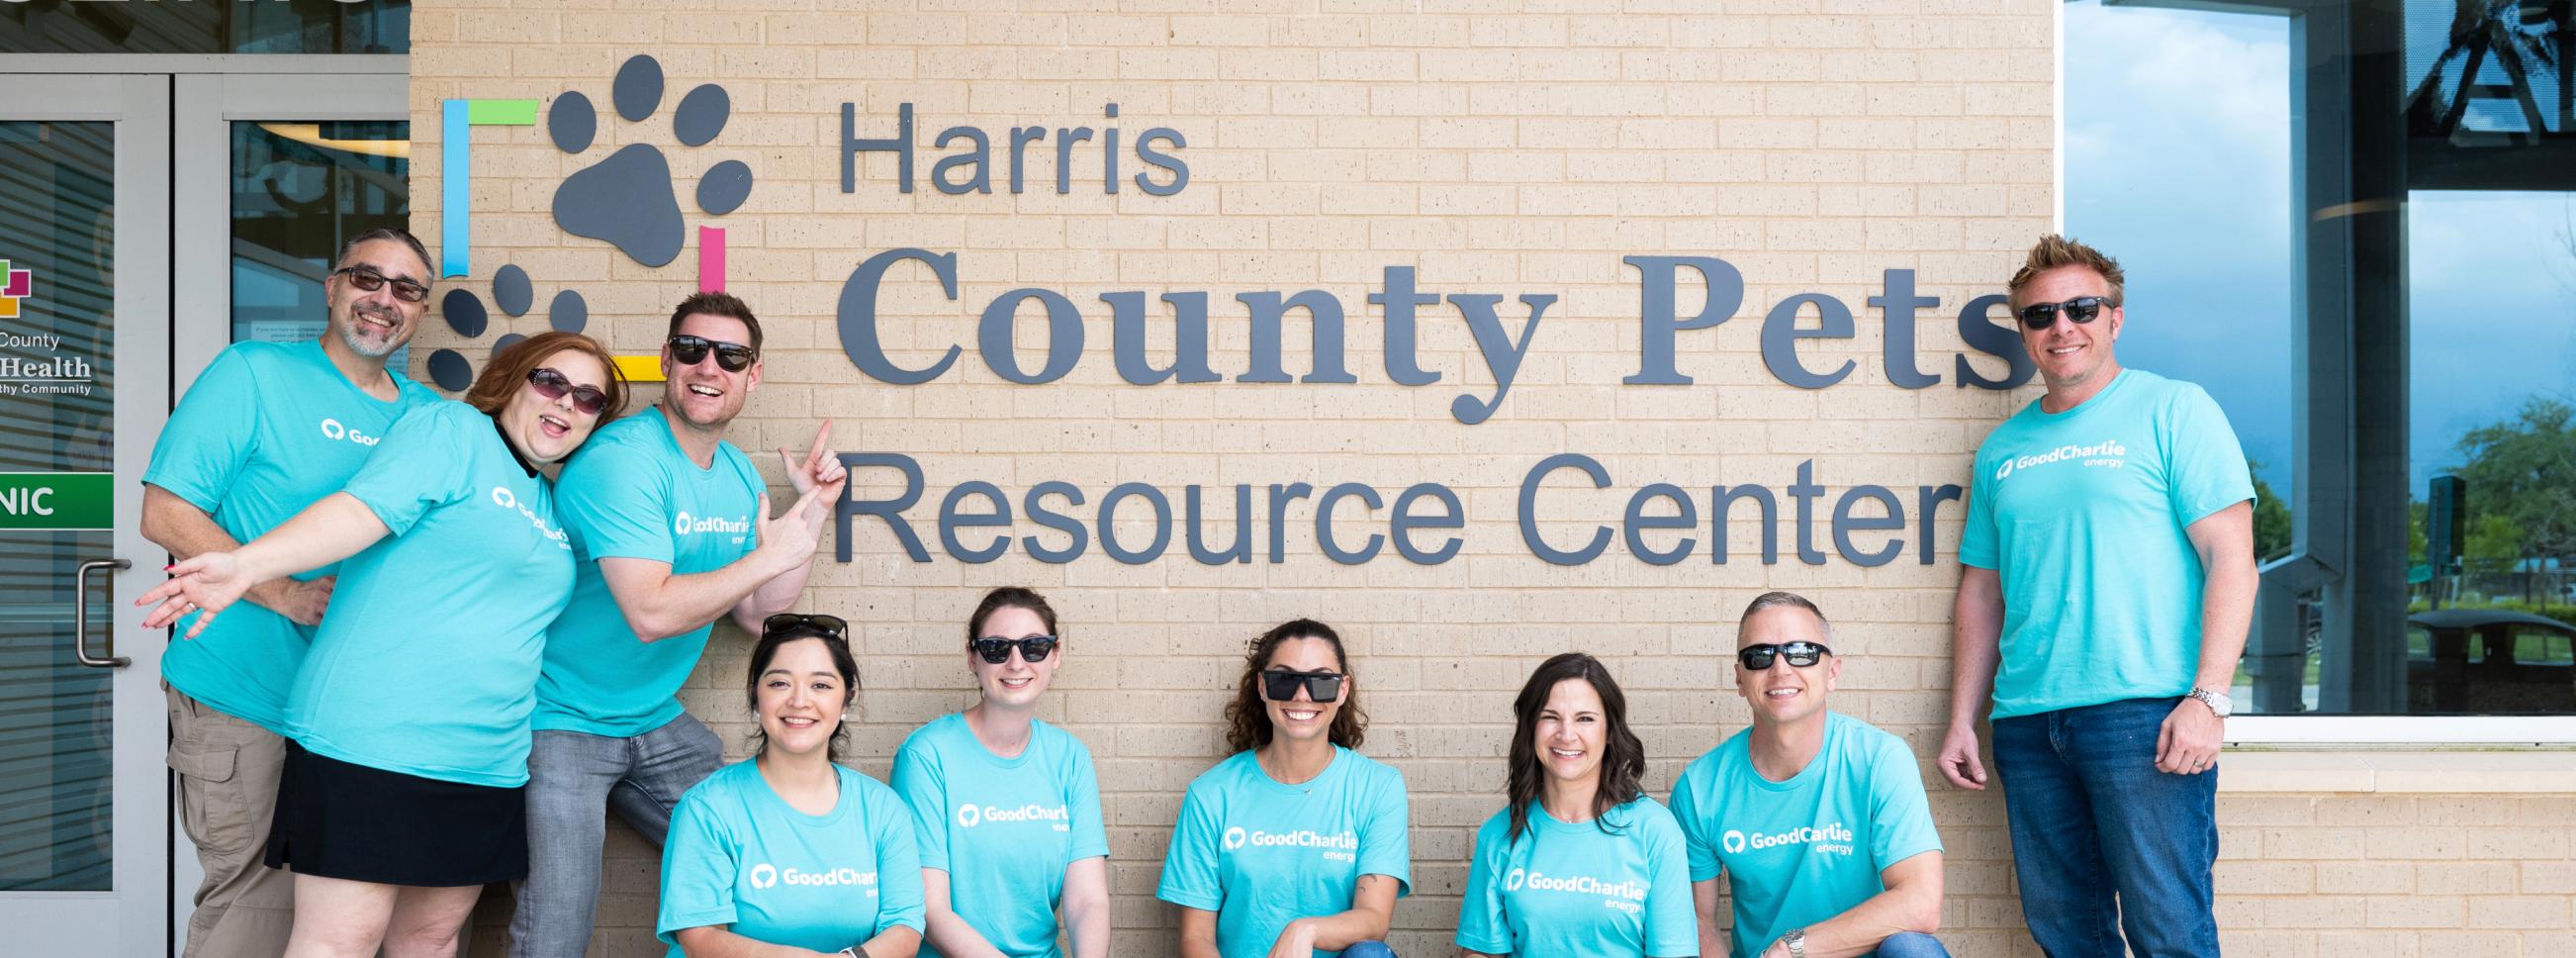 The GoodCharlie team pose for a photo in front of Harris County Pets Resource Center.